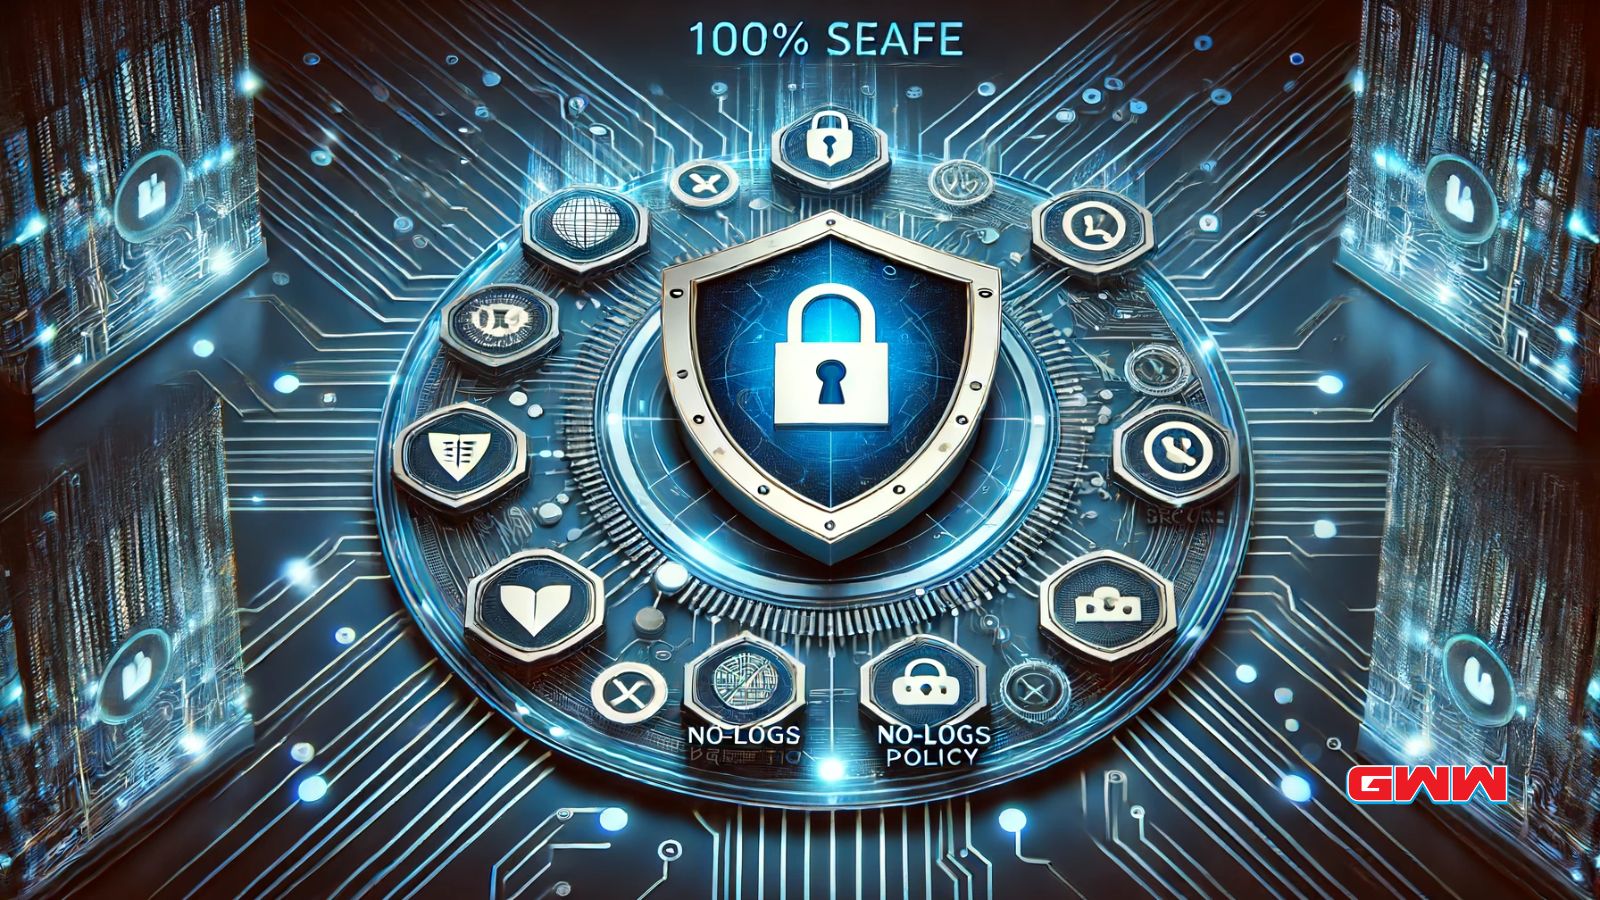 100% safe VPN with no-logs policy and encryption icons